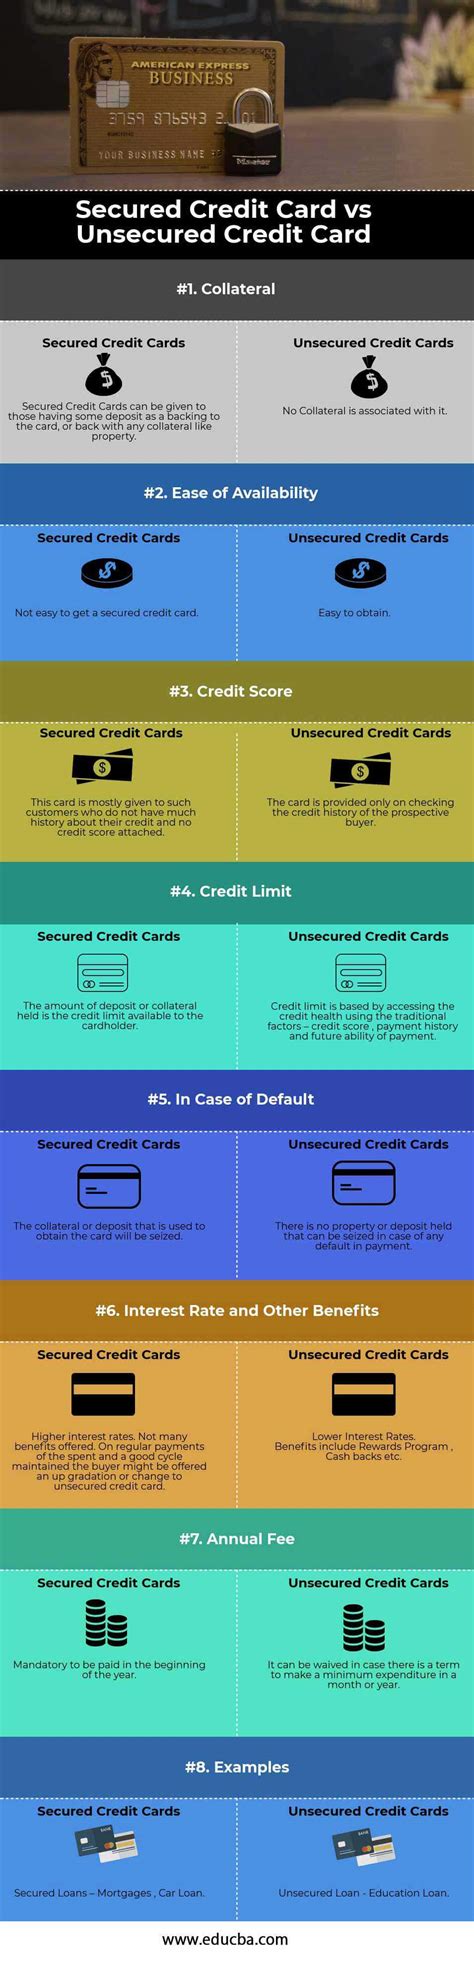 Unsecured, in this case, means that the debt is not secured by collateral, such as a deposit that the lender or card issuer can keep if you fail to make payments. Secured vs Unsecured Credit Card | Top 8 Differences (With Infographics)